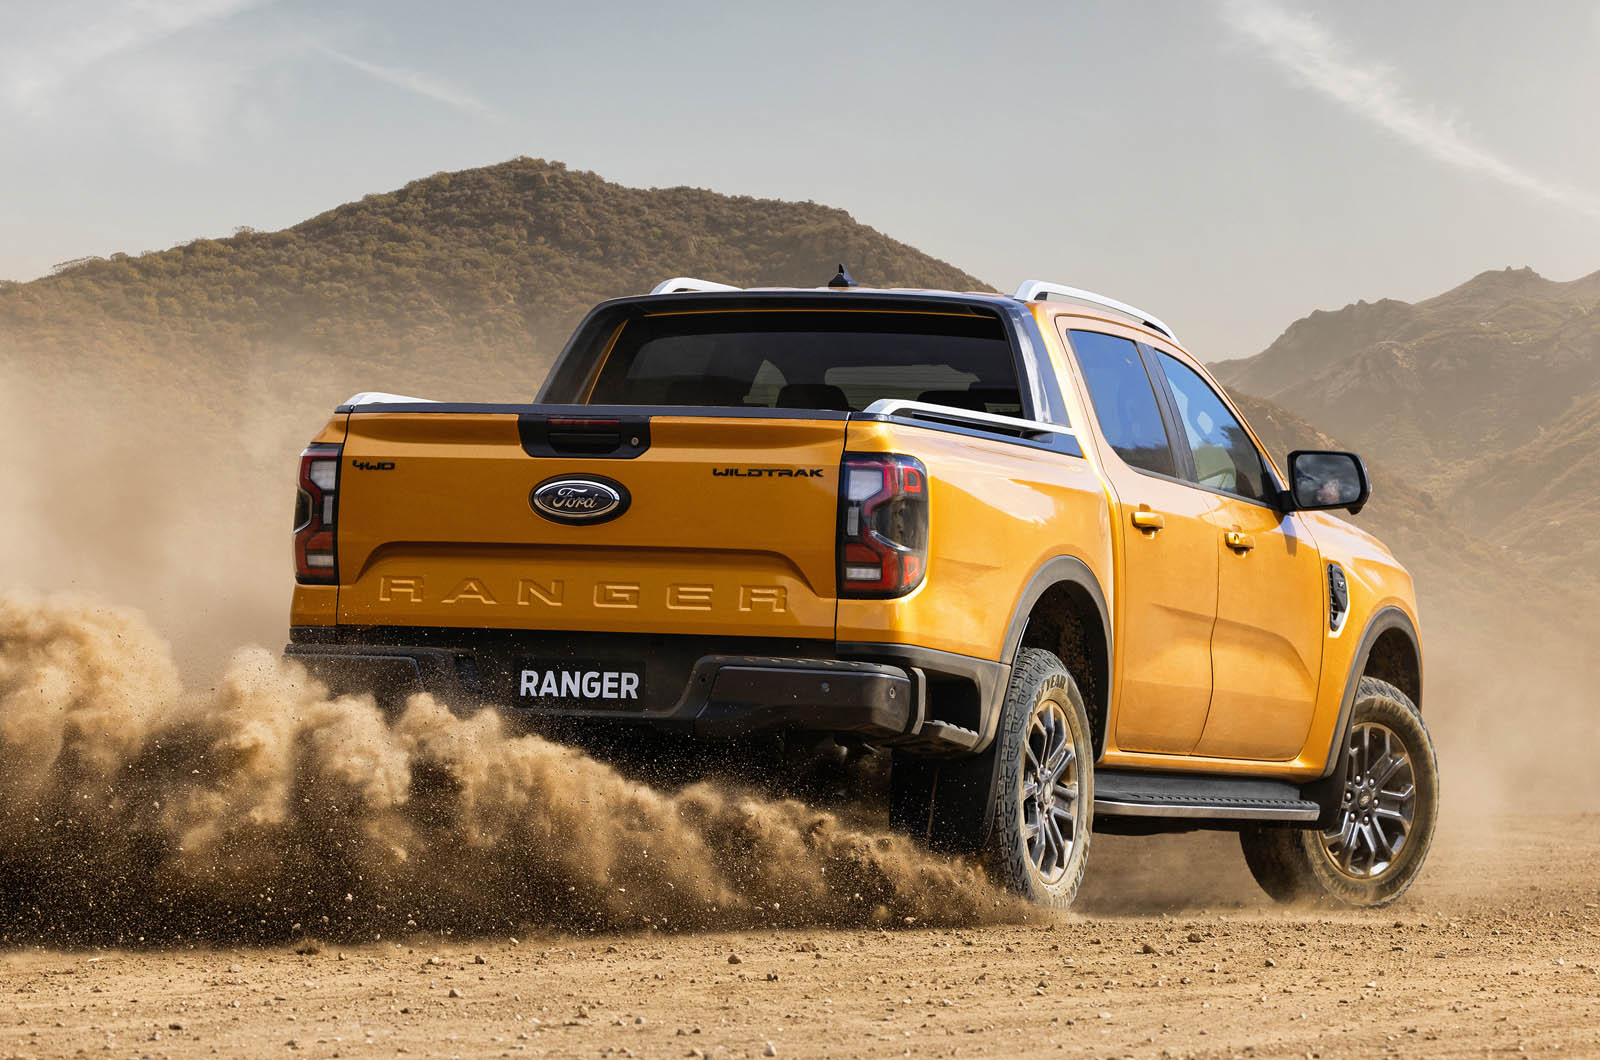 2022 Ford Ranger arrives with new look and engine options